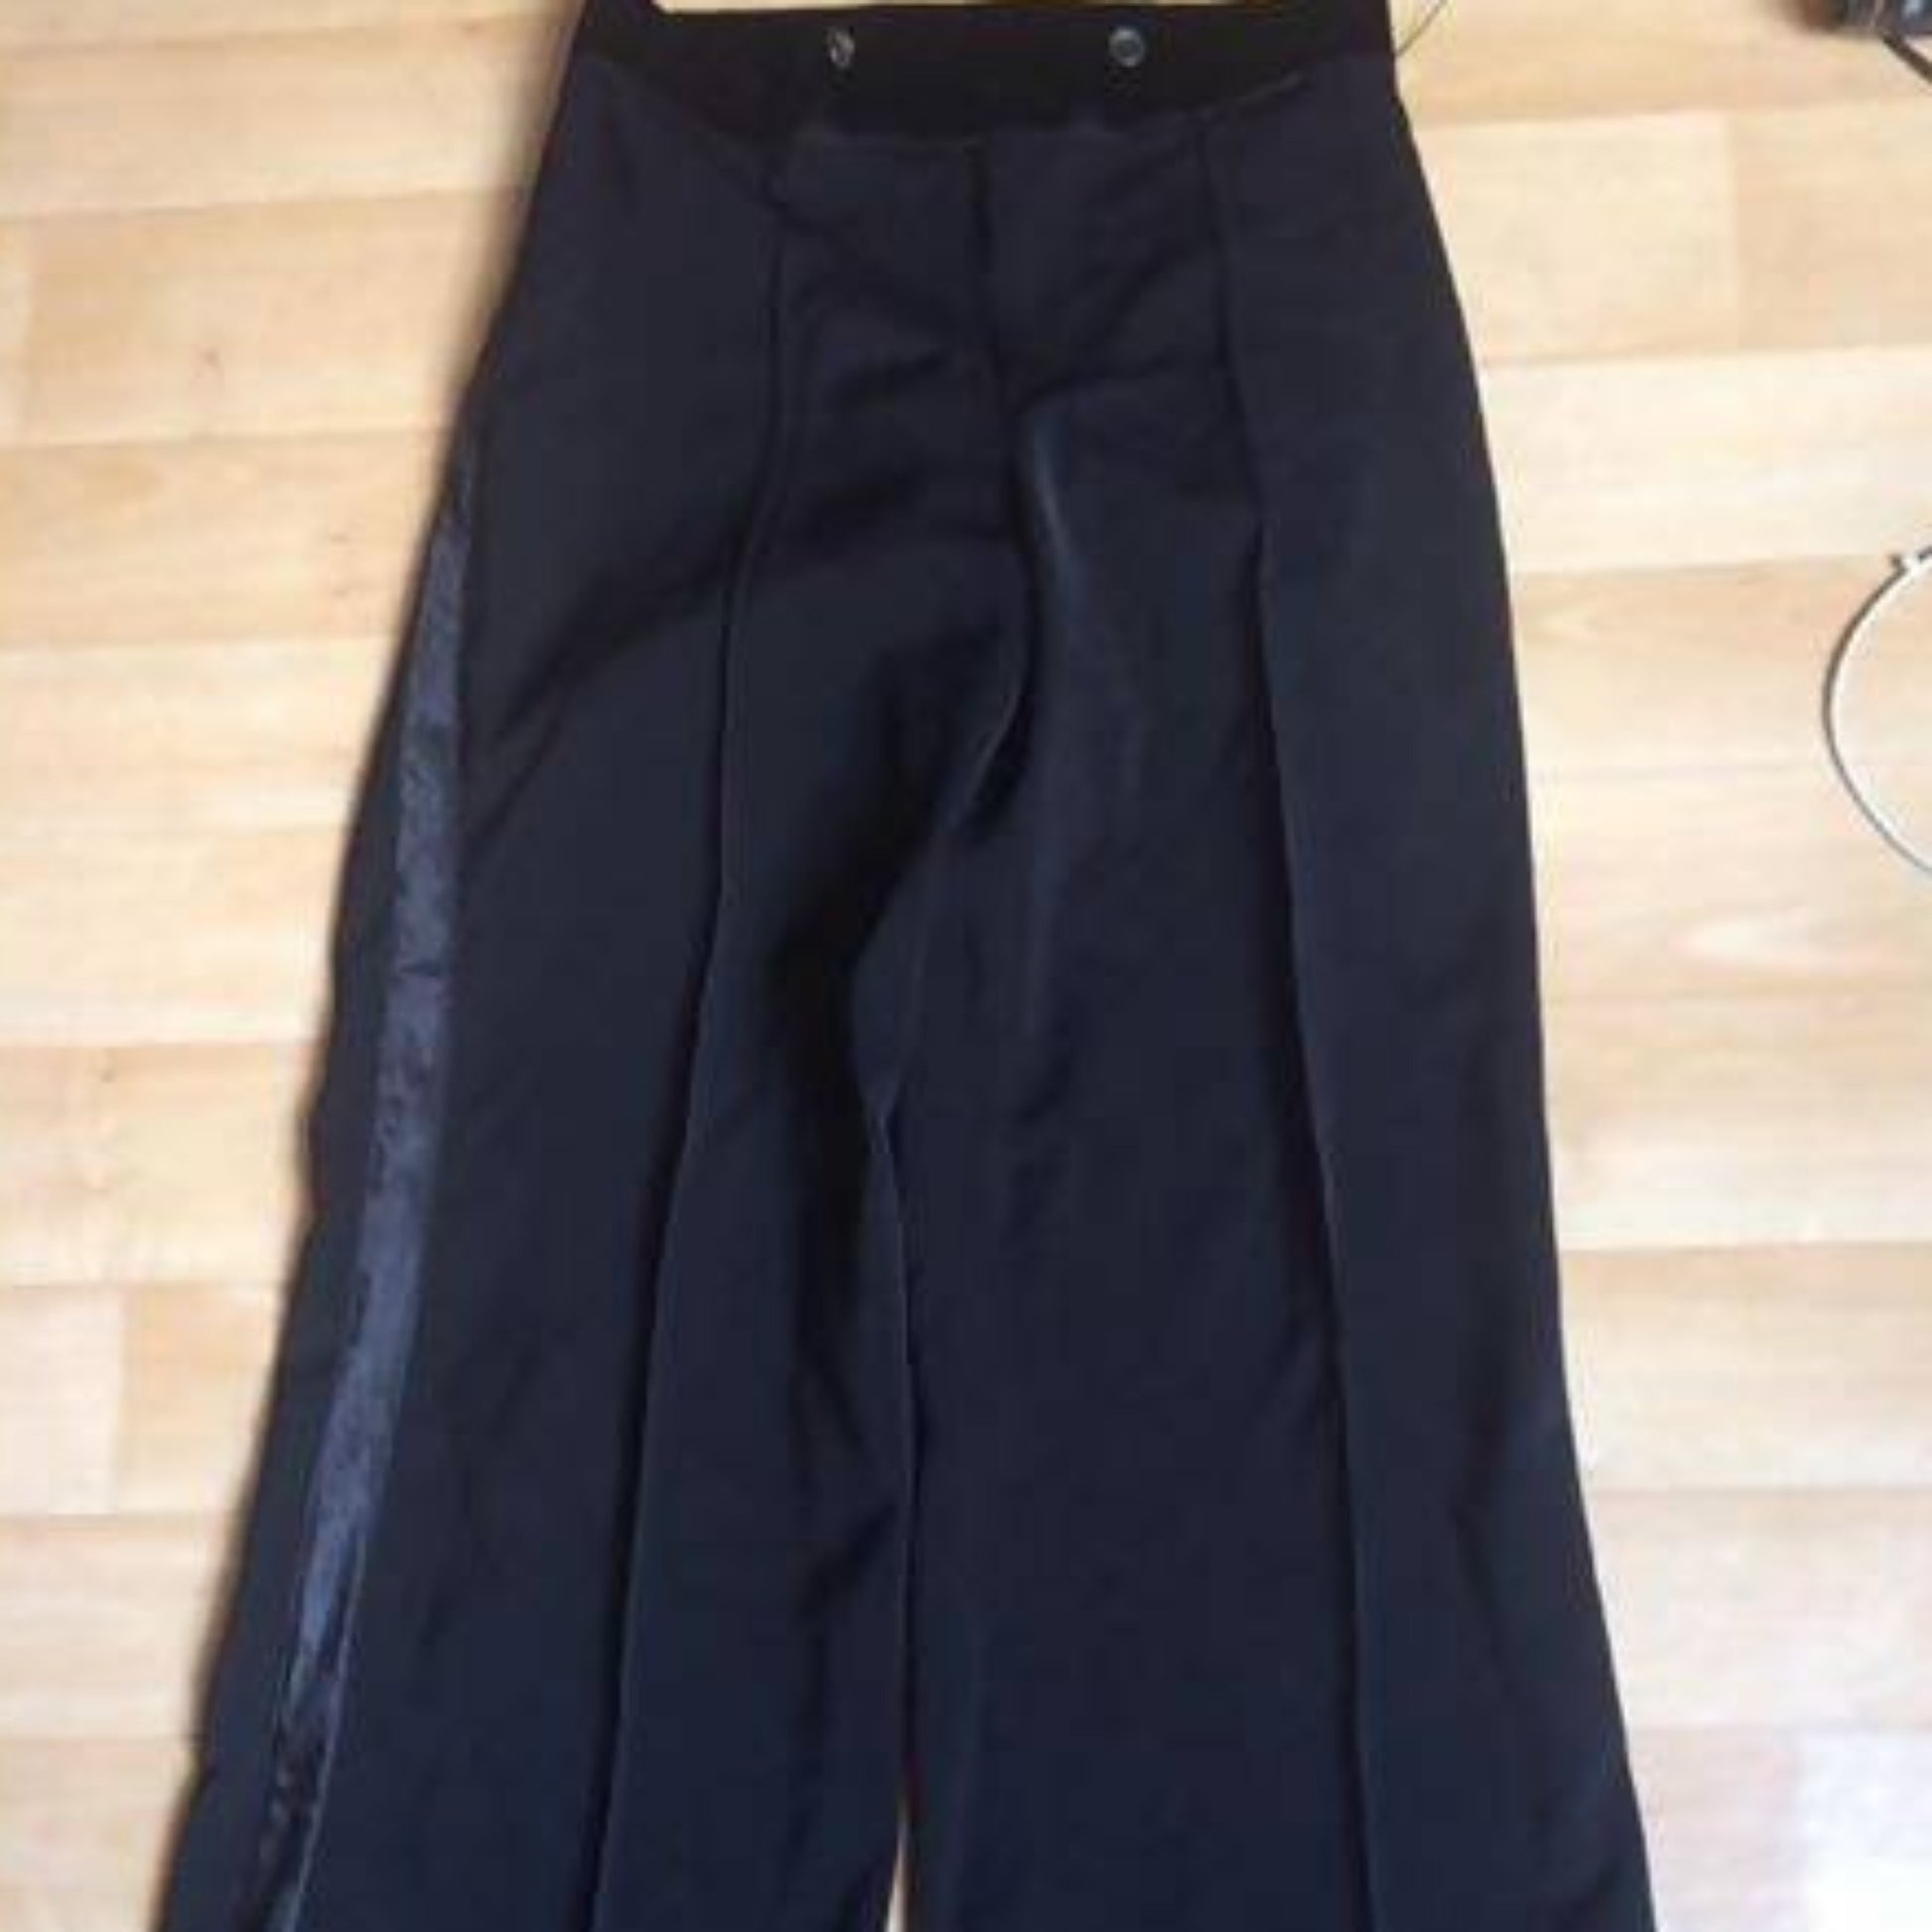 Mens trousers size XS/S - DDressing